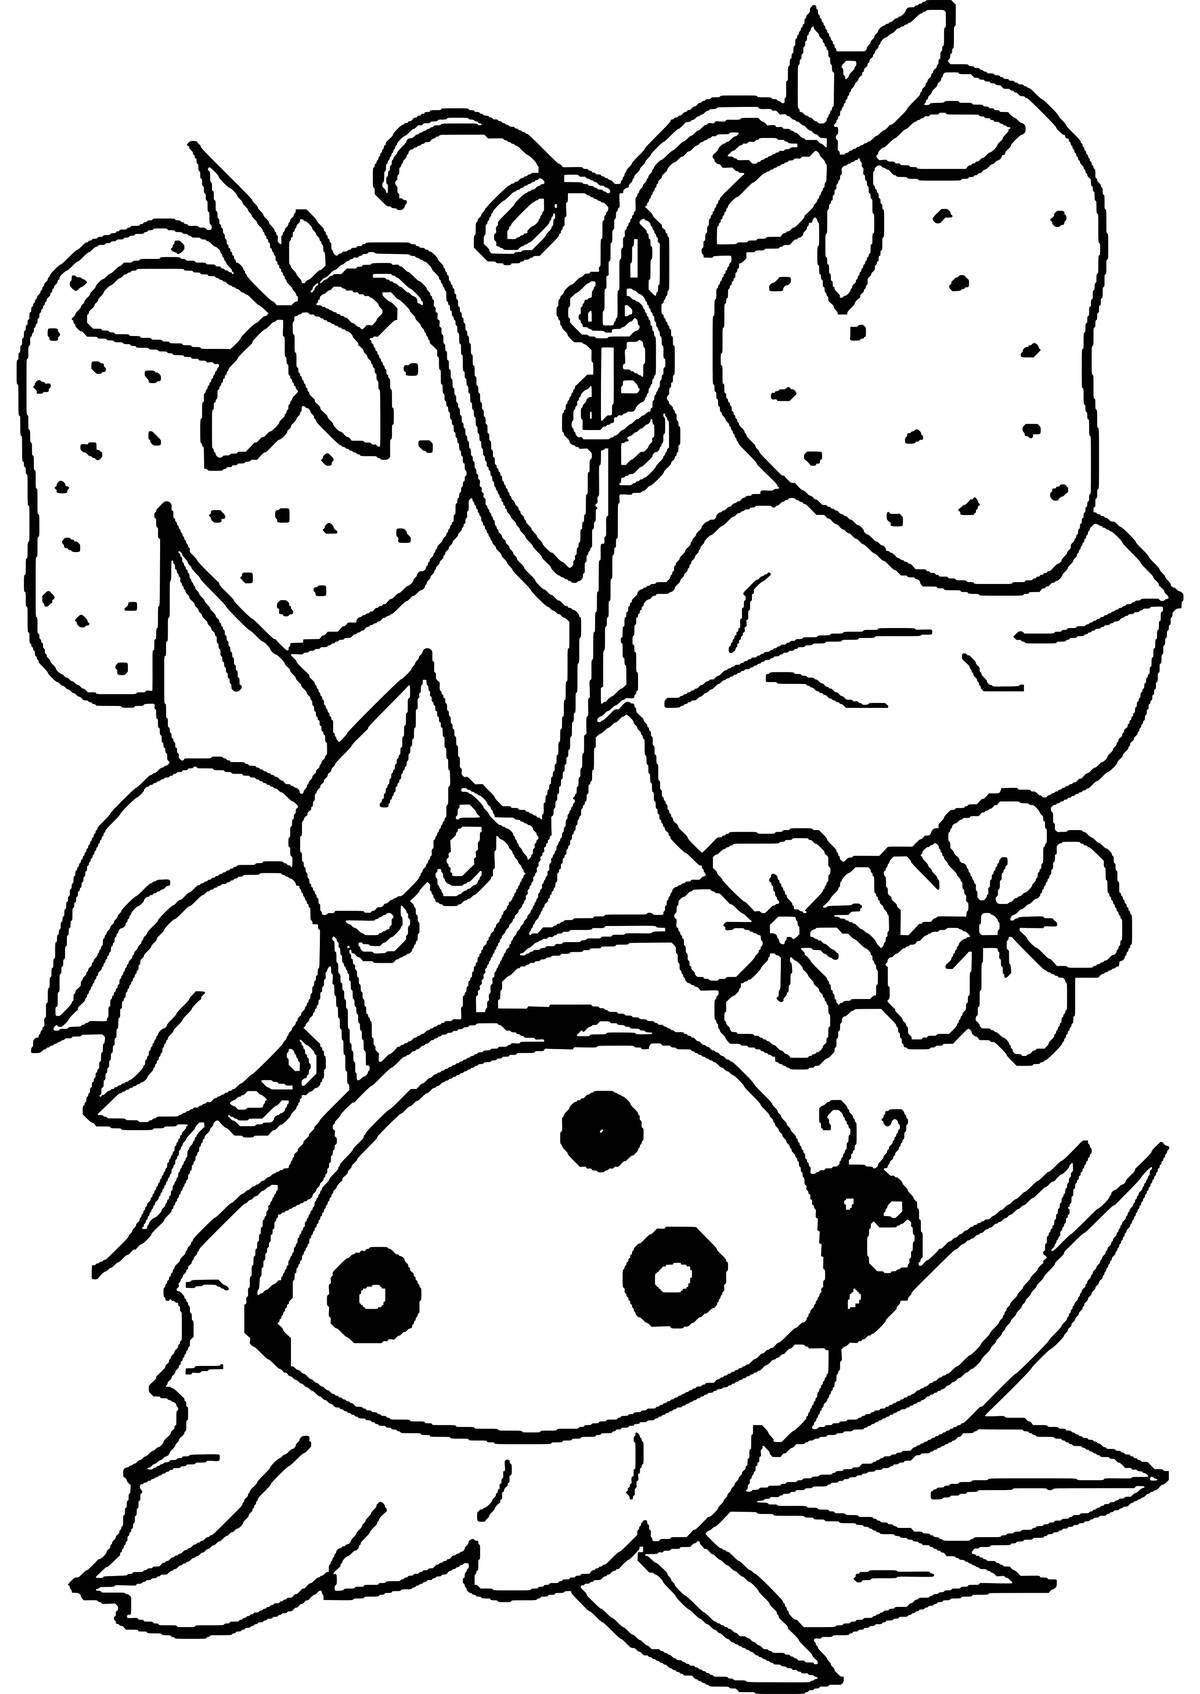 Incredible coloring pages of all kinds